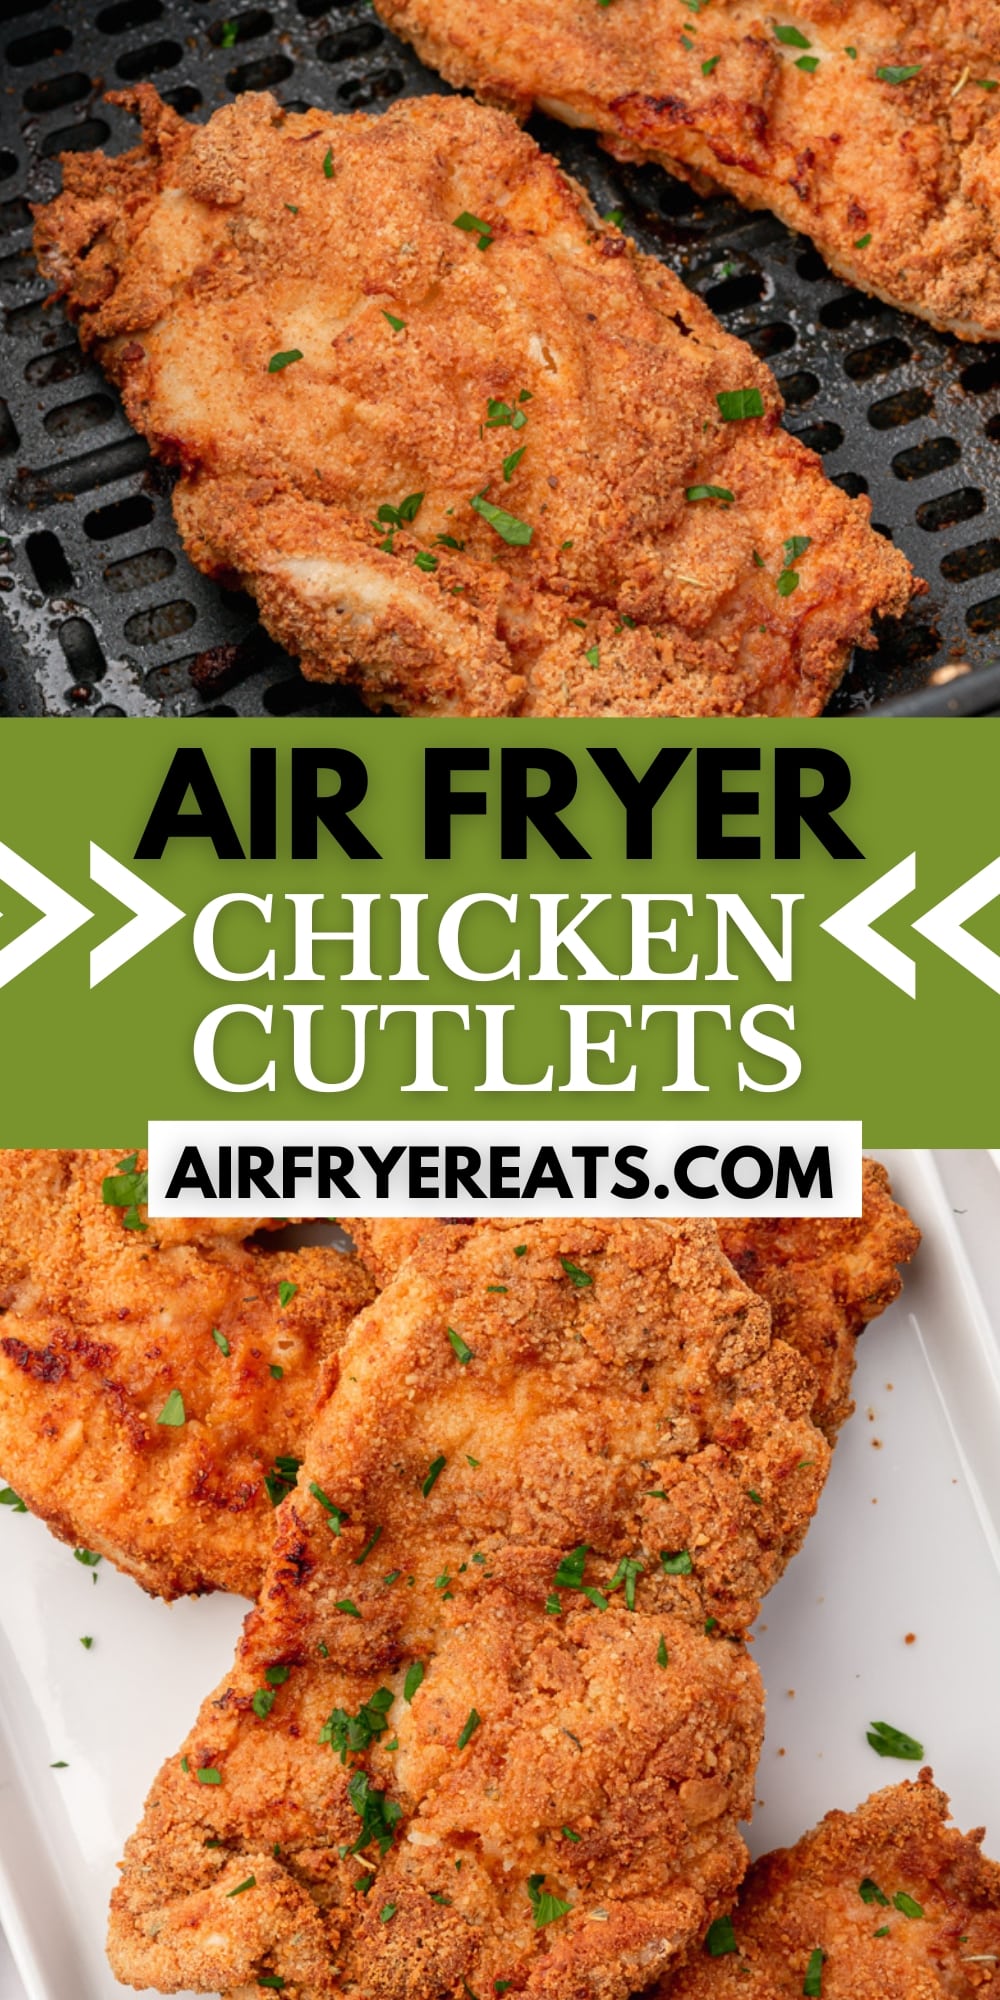 two images of breaded chicken cutlets. Green text box in center says "air fryer chicken cutlets"